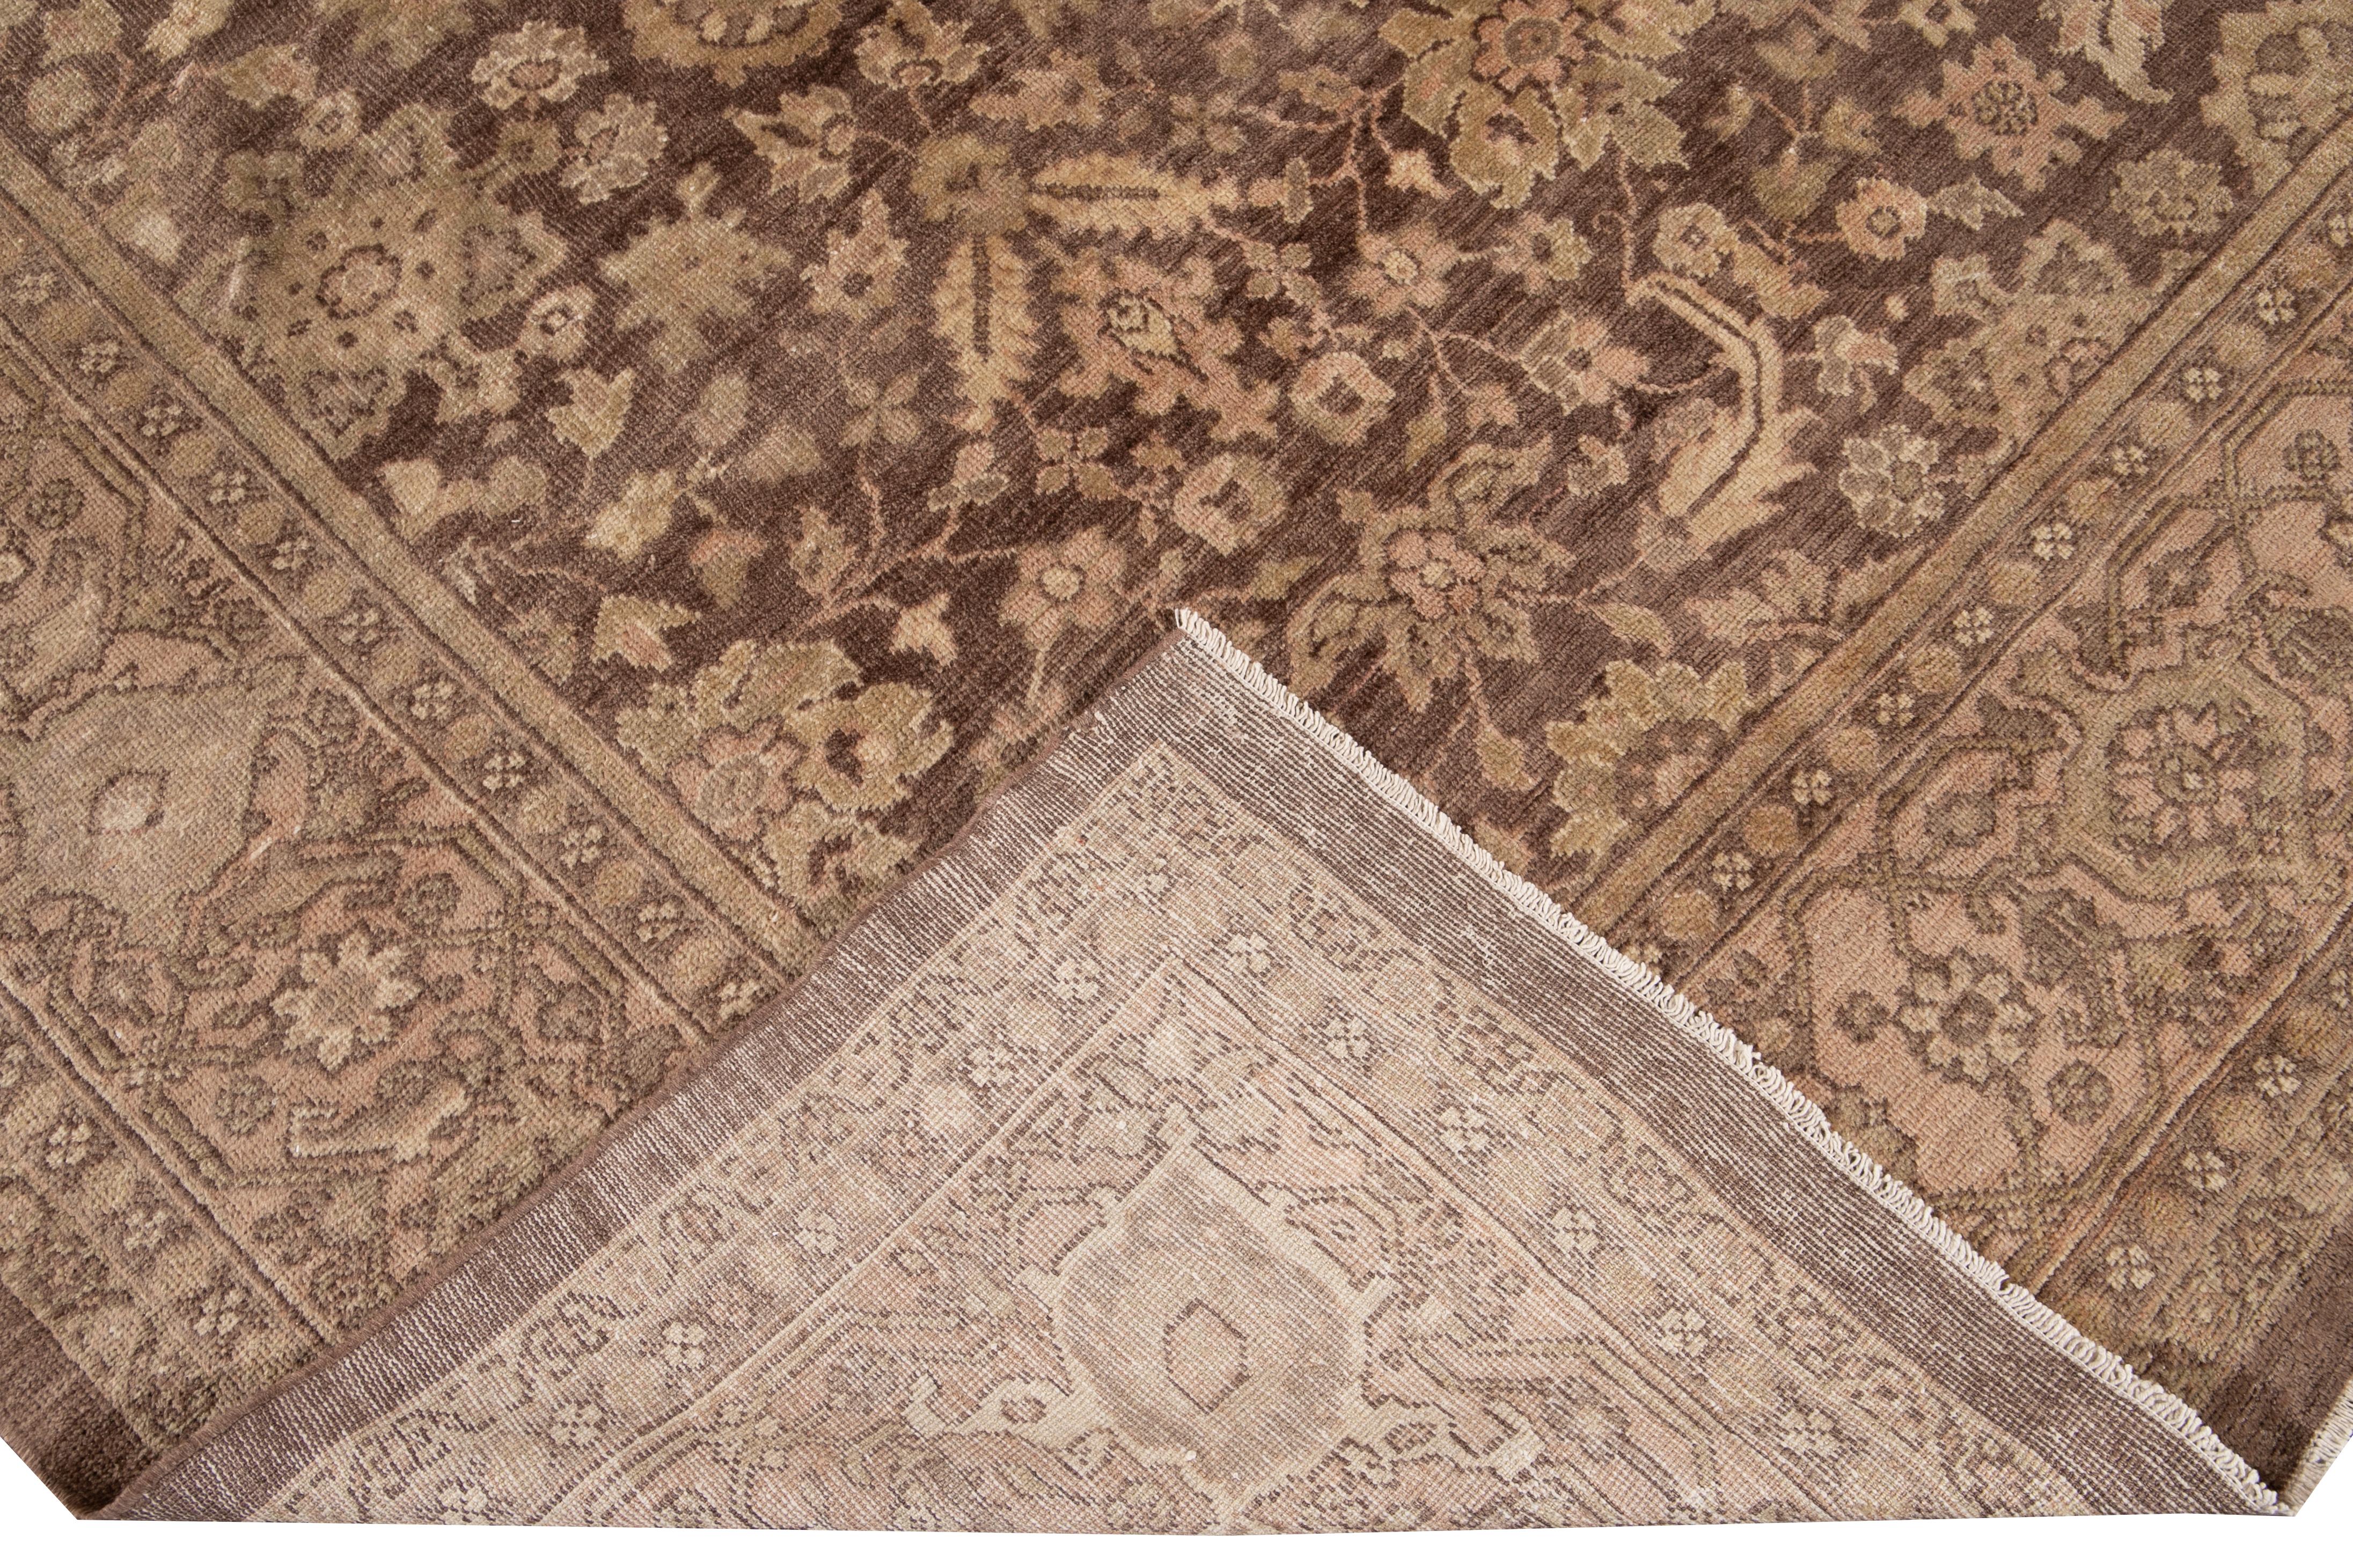 Beautiful antique Mahal hand knotted wool rug with a maroon field. This rug has a peach frame and beige accents in a gorgeous all-over geometric floral distressed design.

This rug measures 9'10